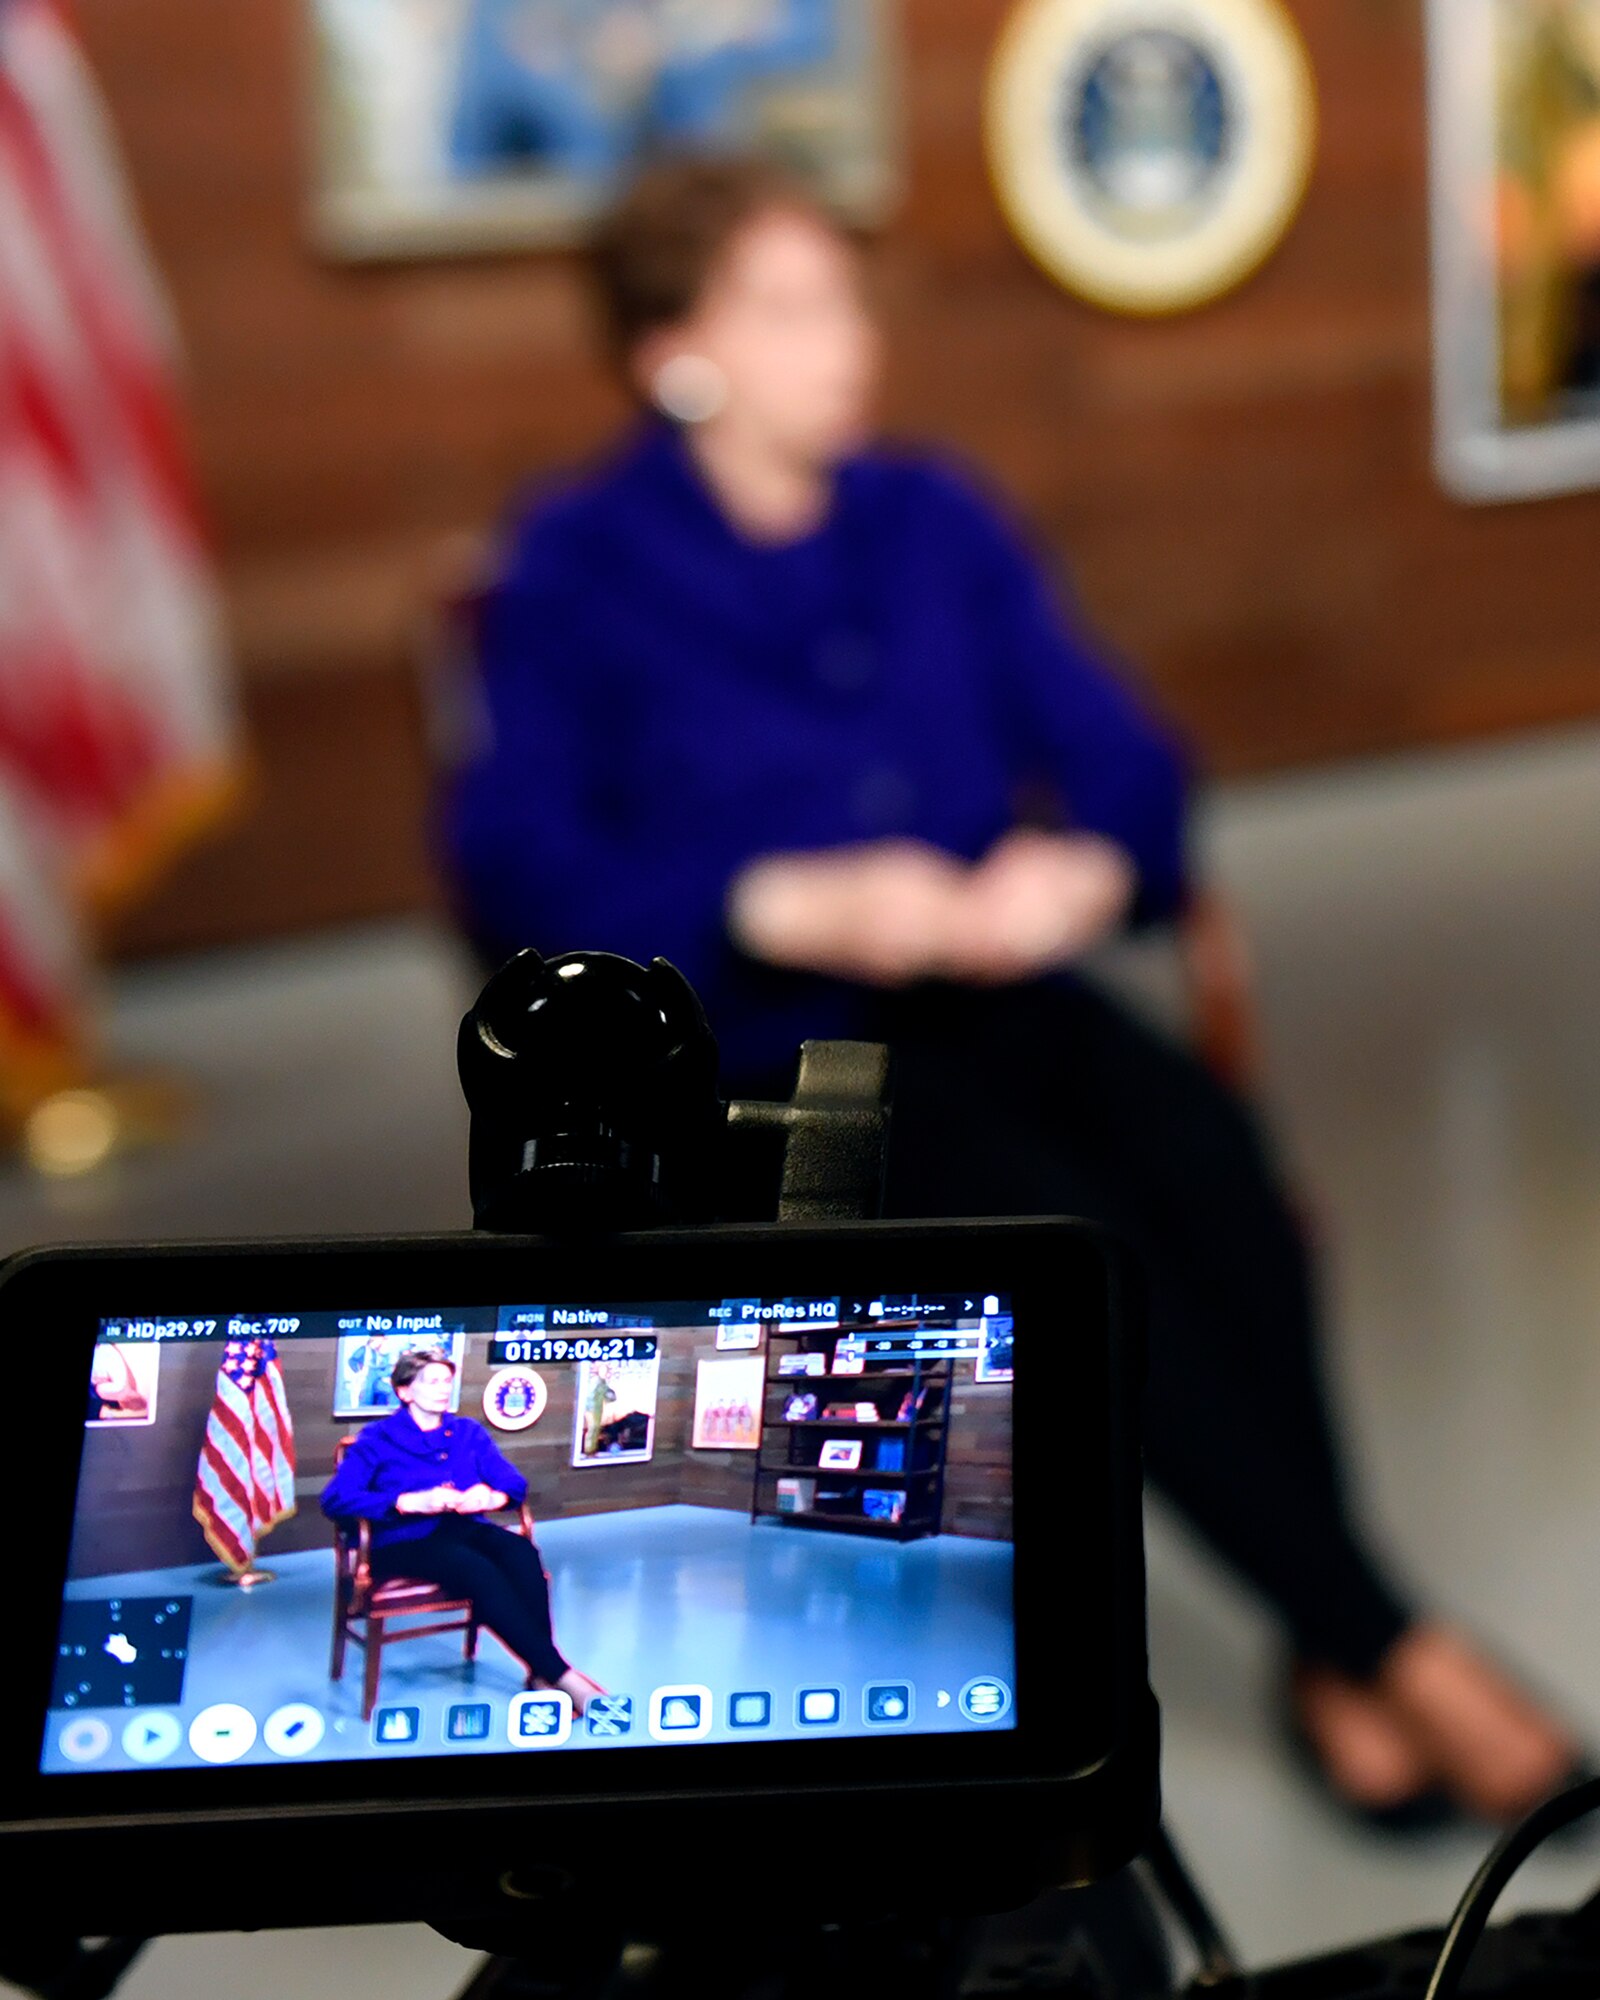 Secretary of the Air Force Barbara Barrett conducts her first Air Force TV interview to Airmen at the Pentagon, Arlington, Va., Oct. 24, 2019. (U.S. Air Force photo by Wayne Clark)